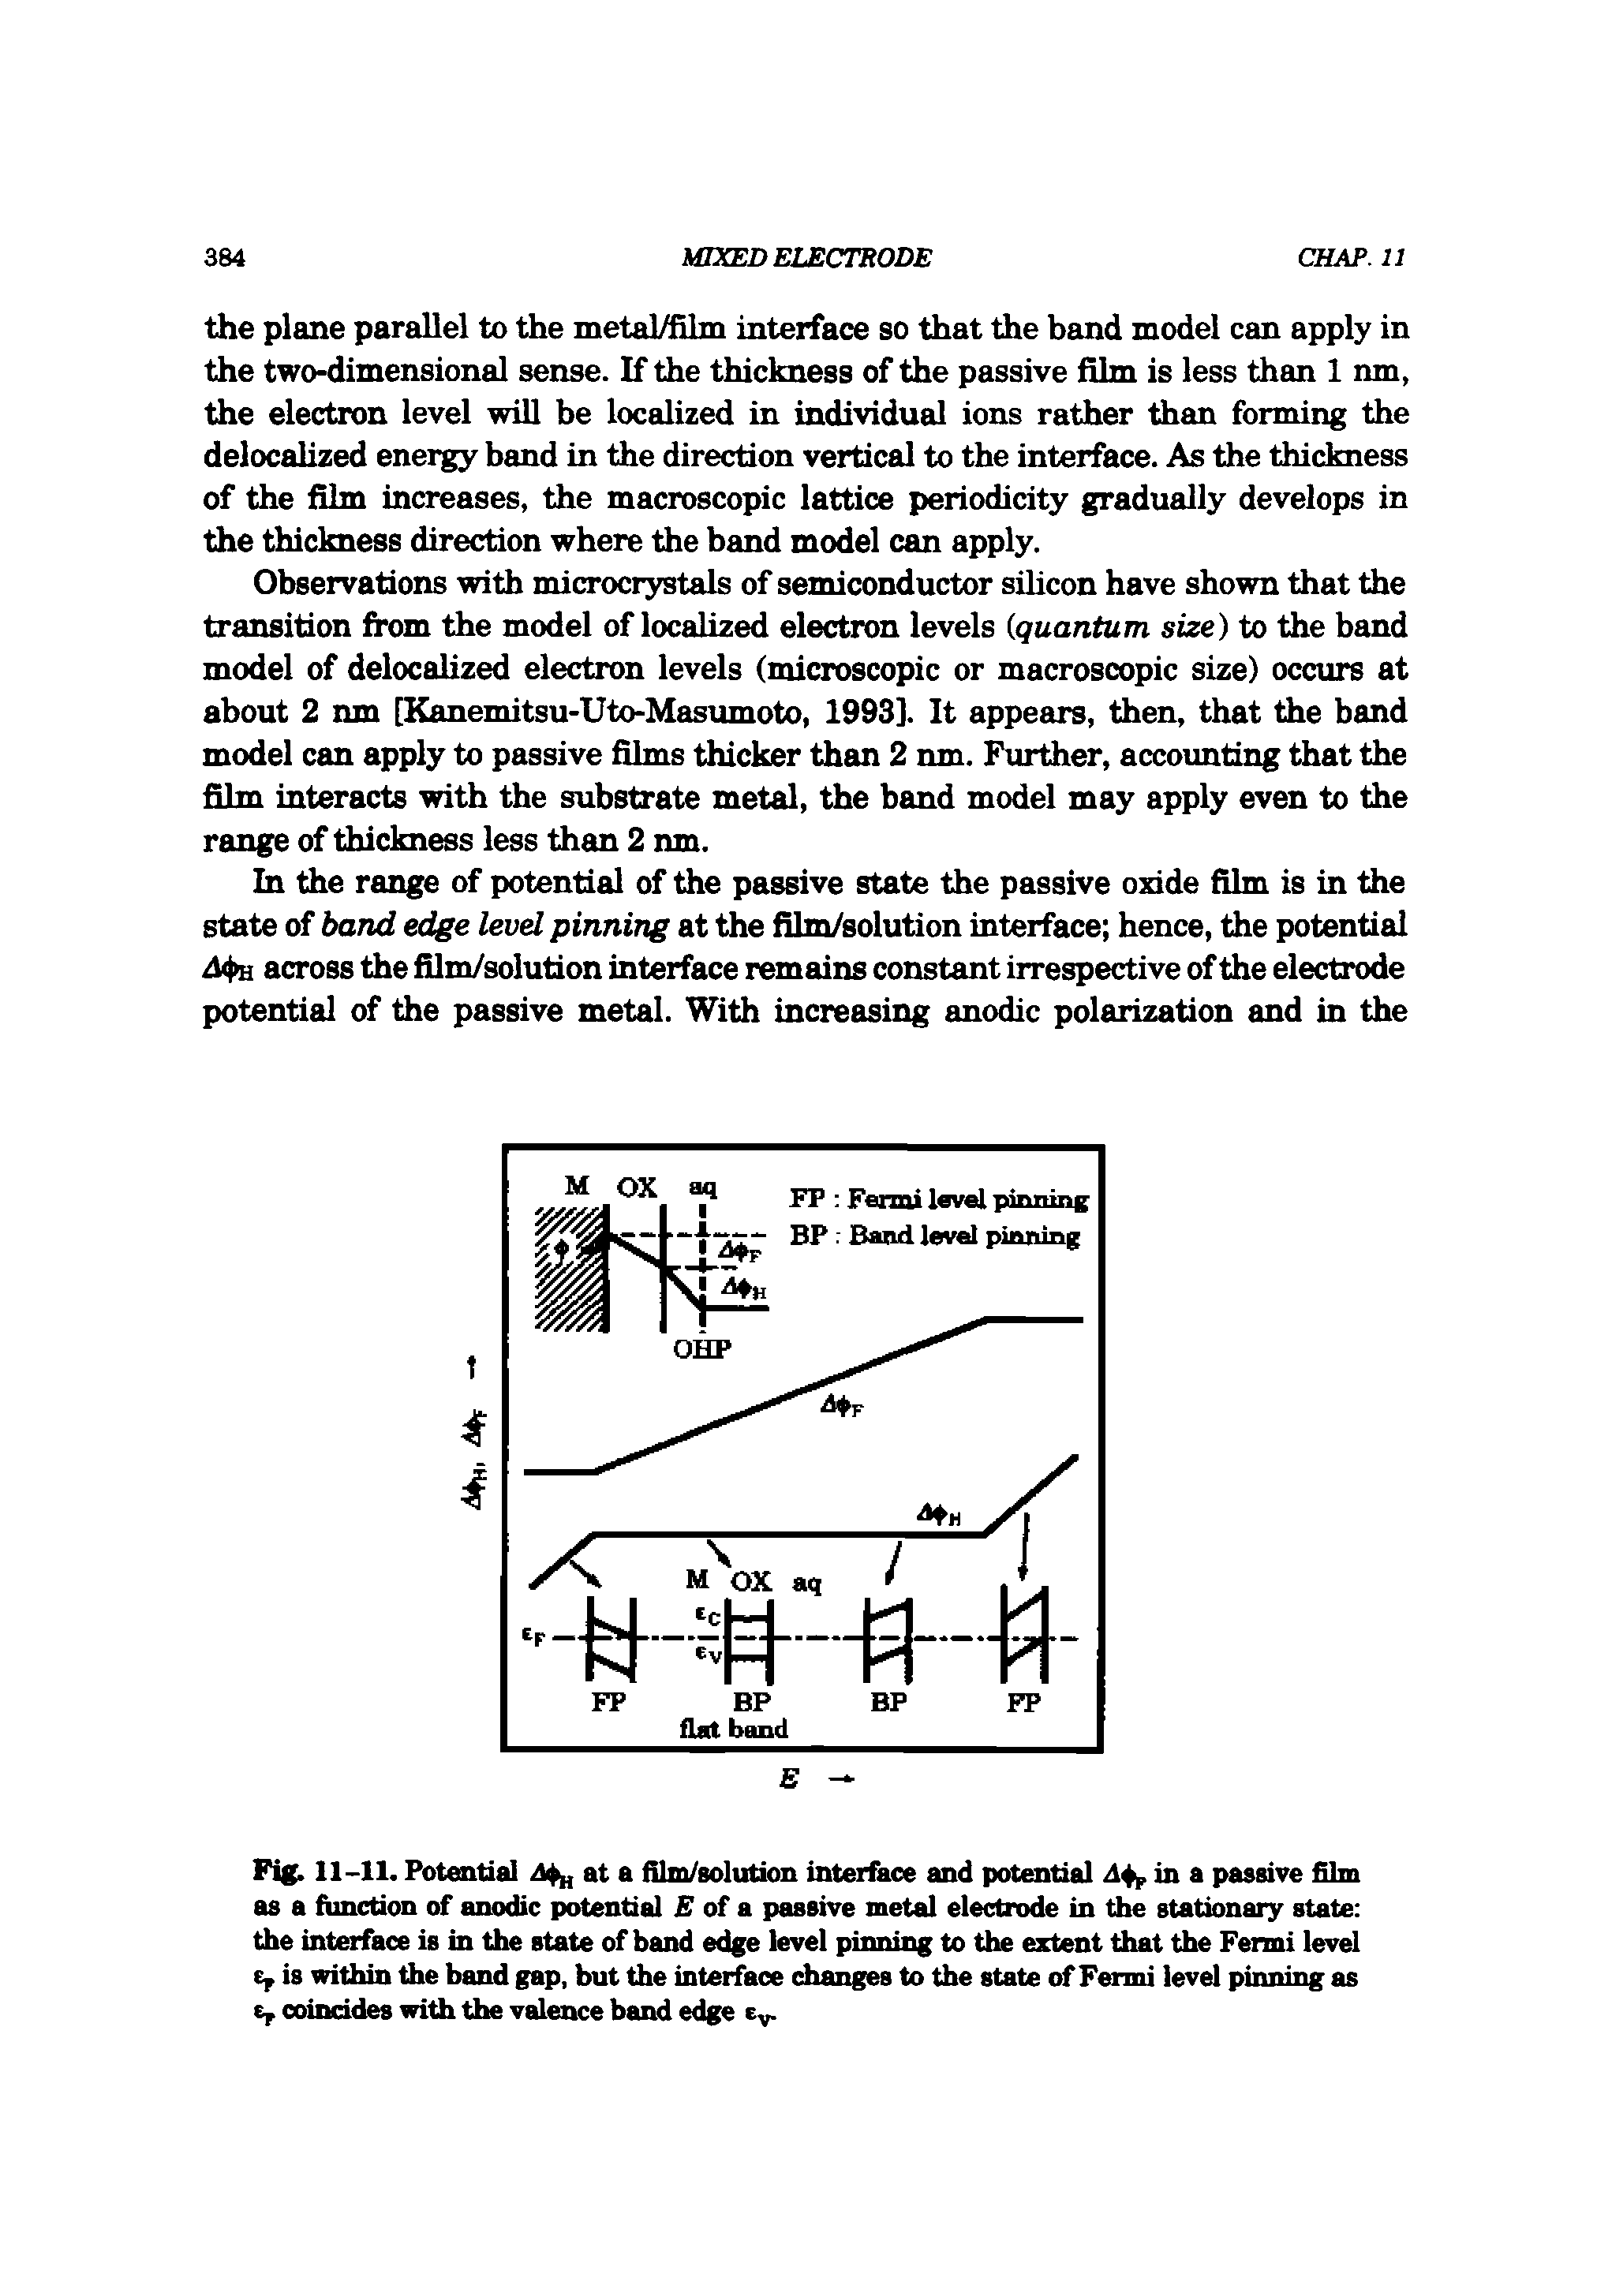 Fig. 11-11. Potential at a film/solution interface and potential dfp in a passive film as a fimction of anodic potential of a passive metal electrode in the stationary state the interface is in the state of band edge level pinning to the extent that the Fermi level e, is within the band gap, but the interface changes to the state of Fermi level pinning as e, coincides with the valence band edge Cy.